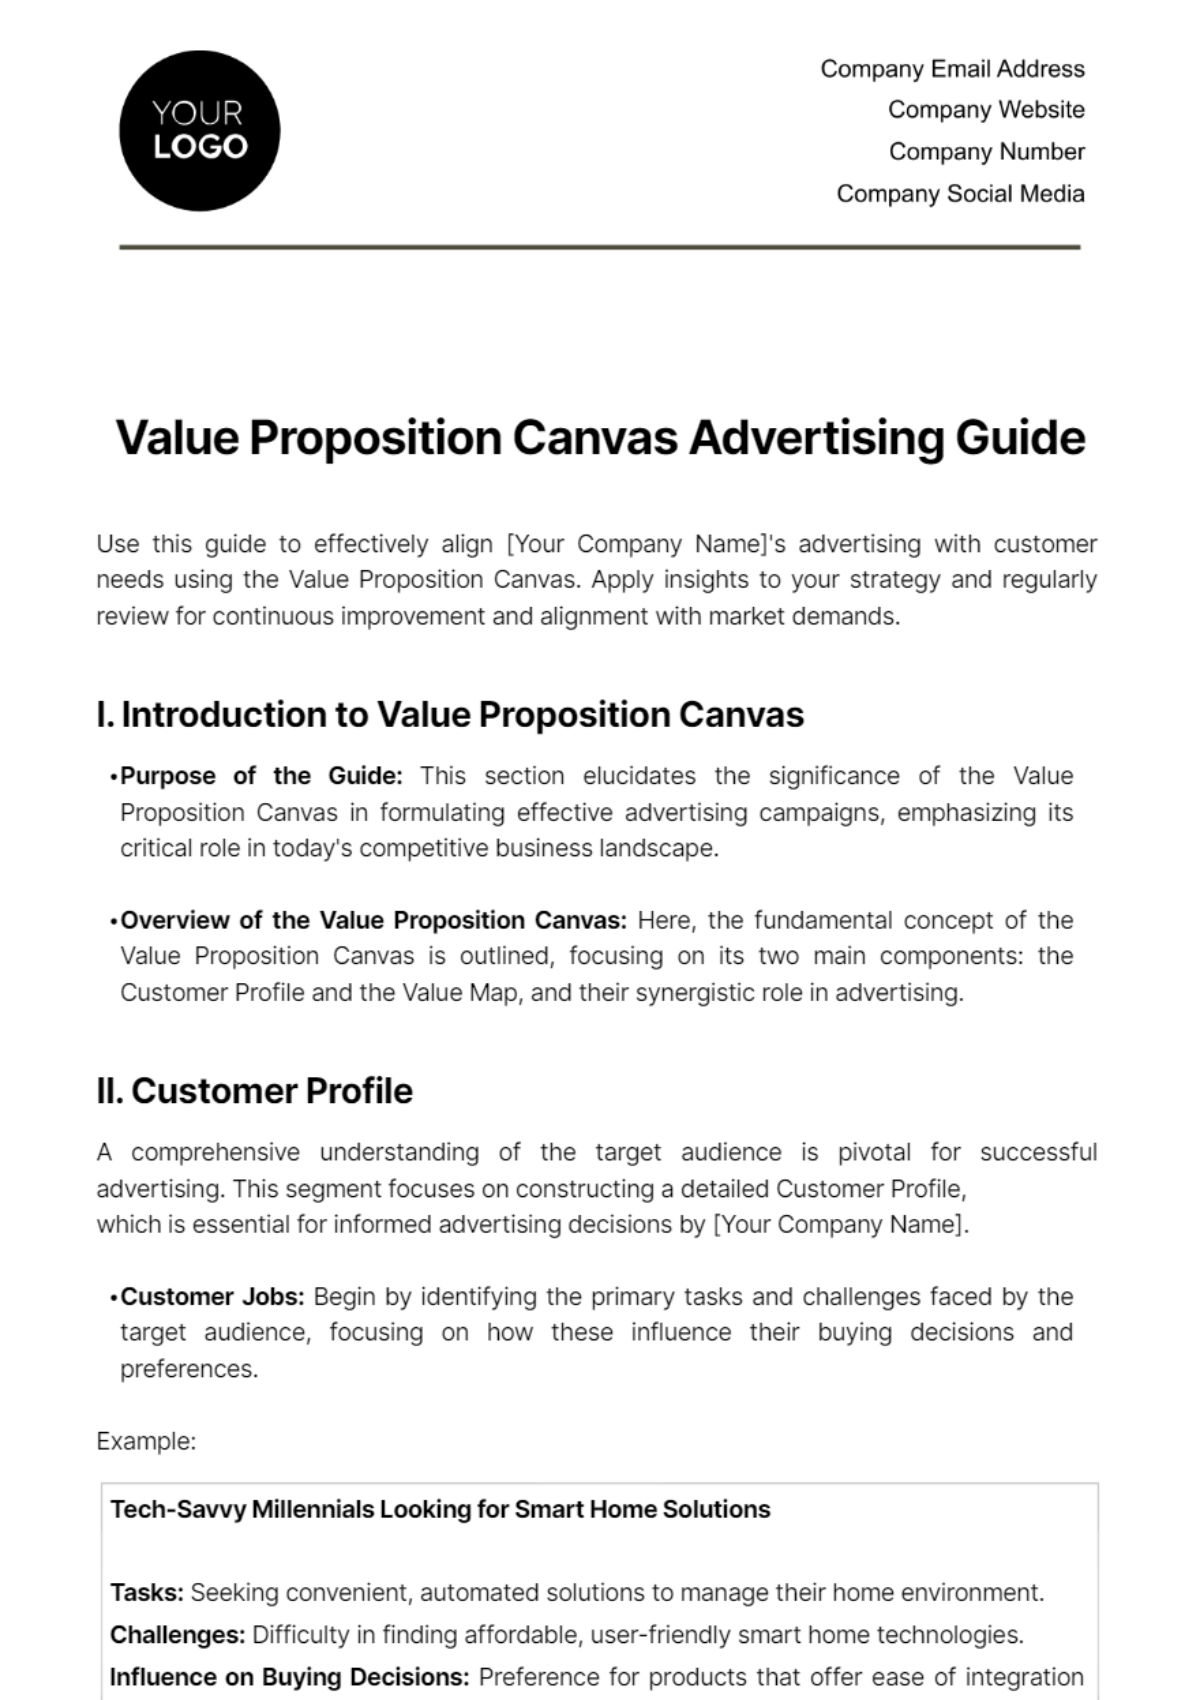 Value Proposition Canvas Advertising Guide Template